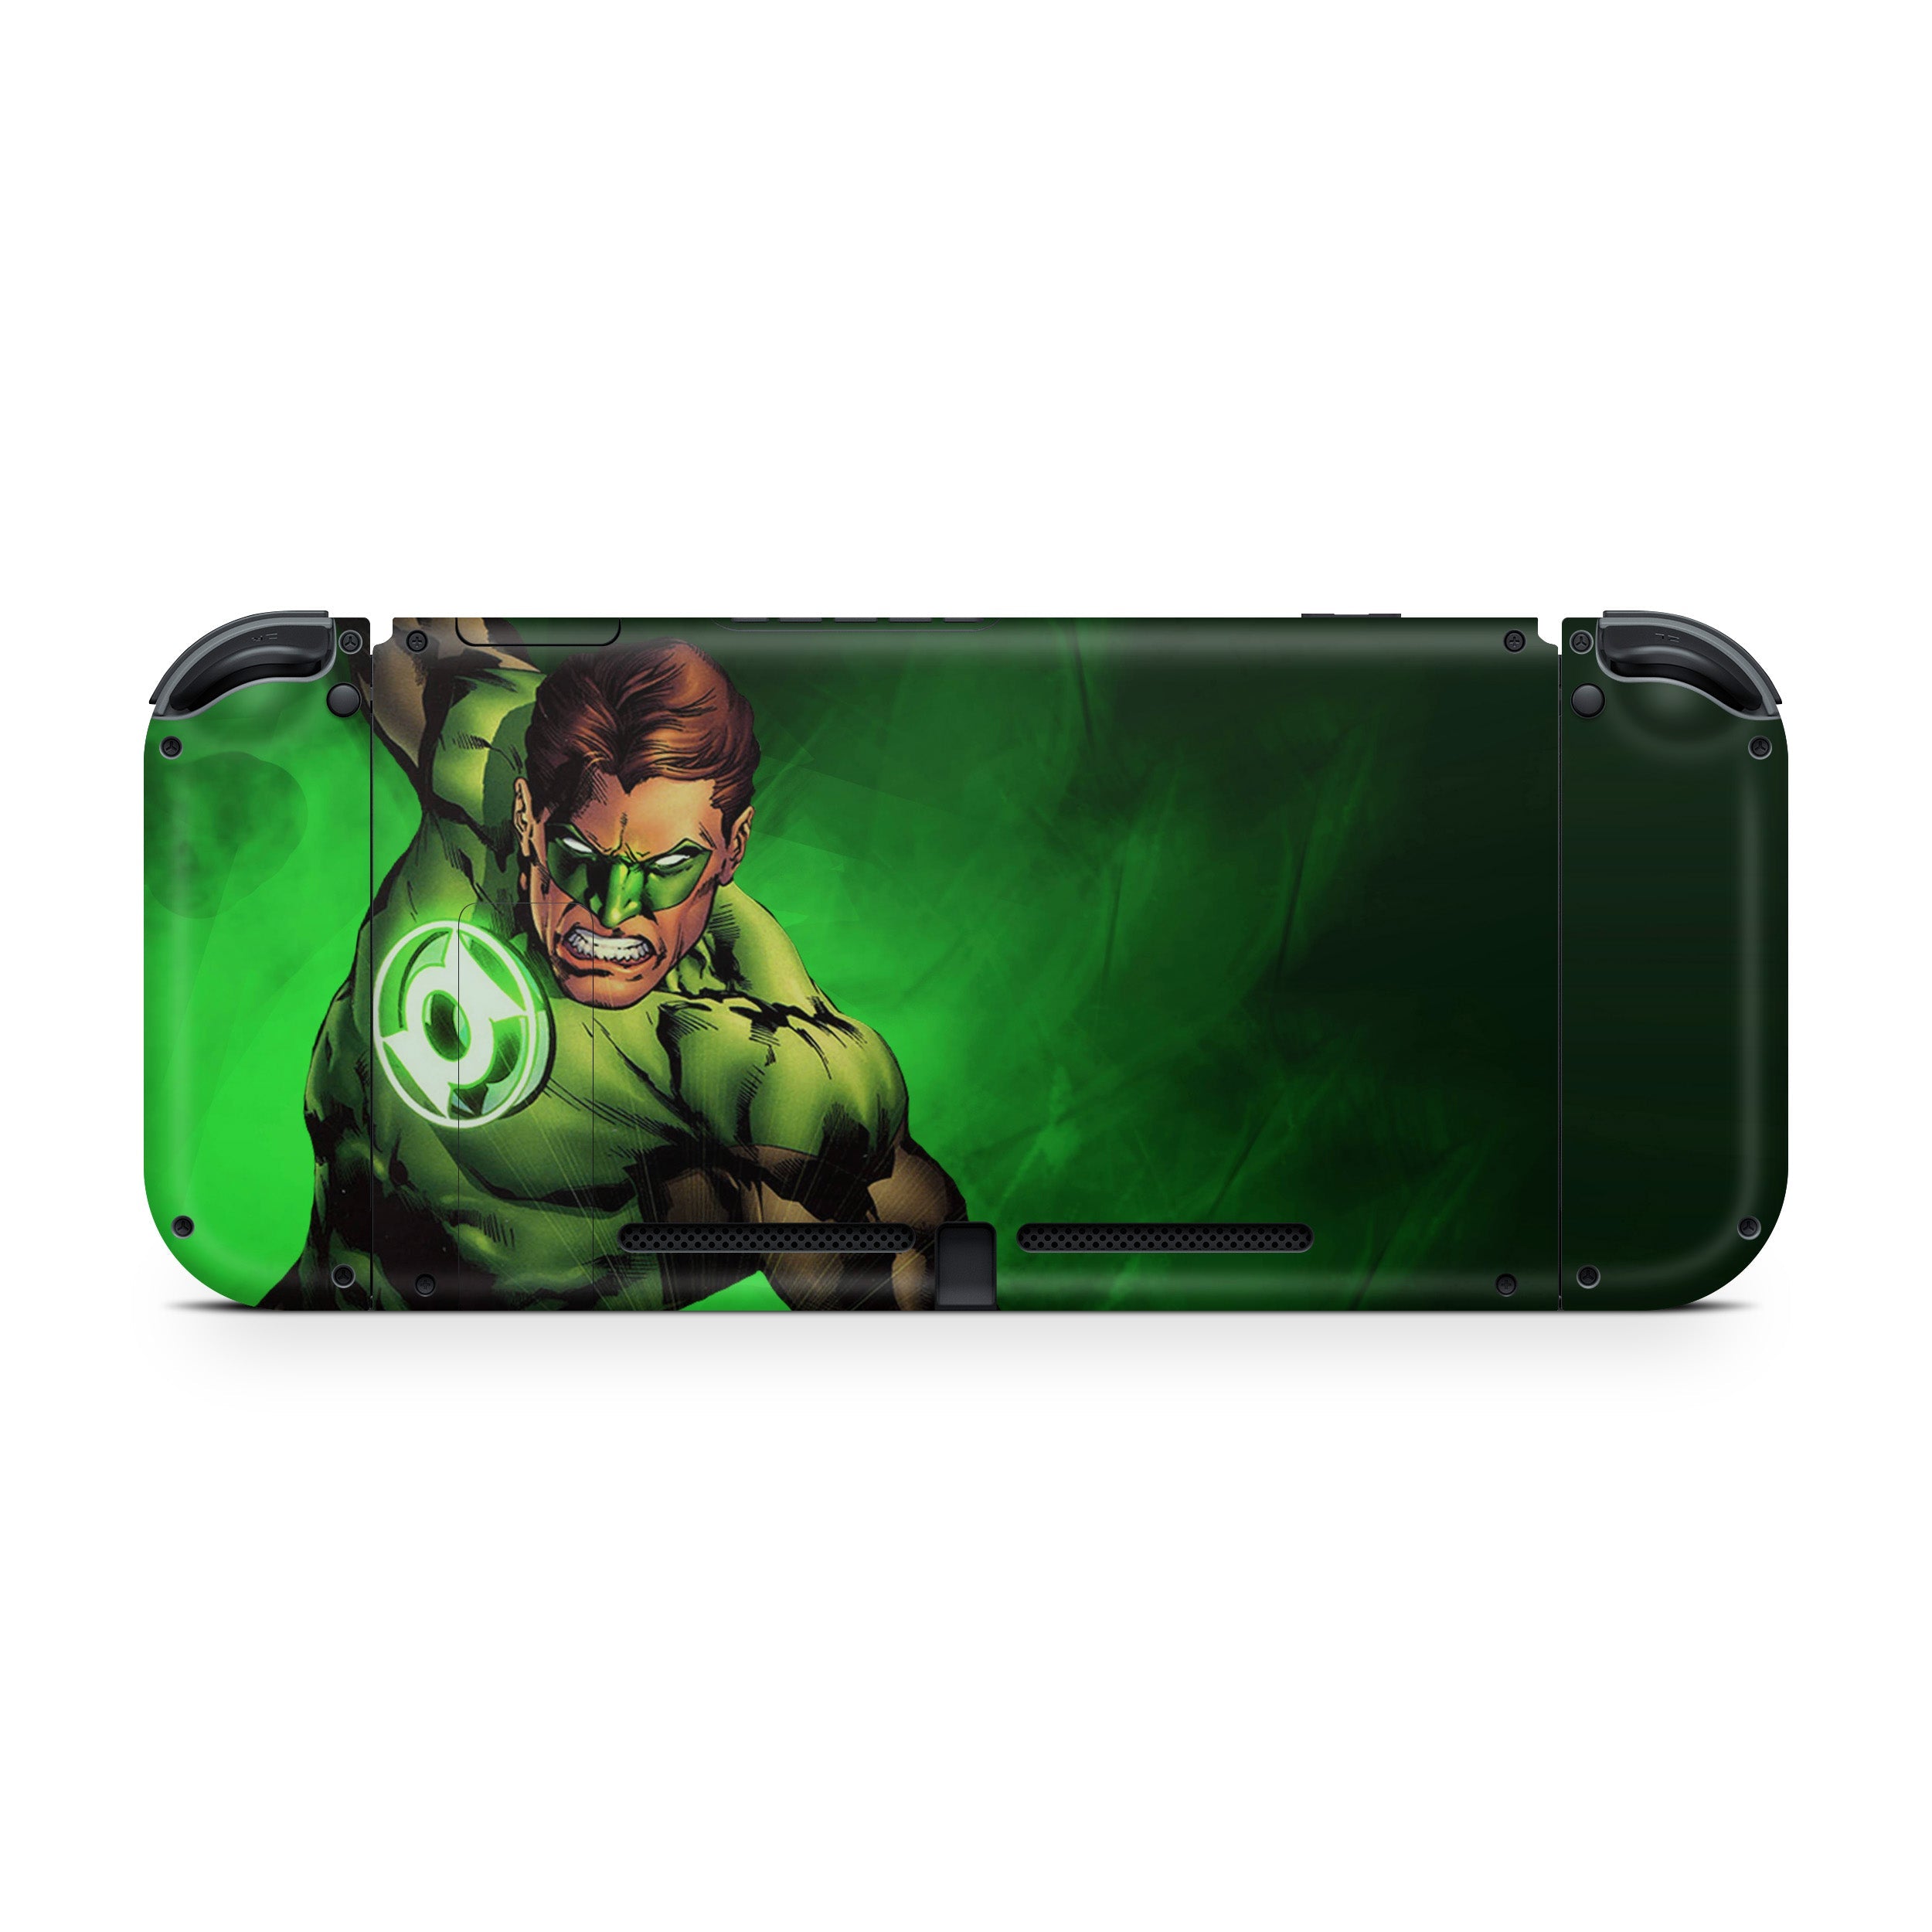 A video game skin featuring a Marvel Green Lantern design for the Nintendo Switch.